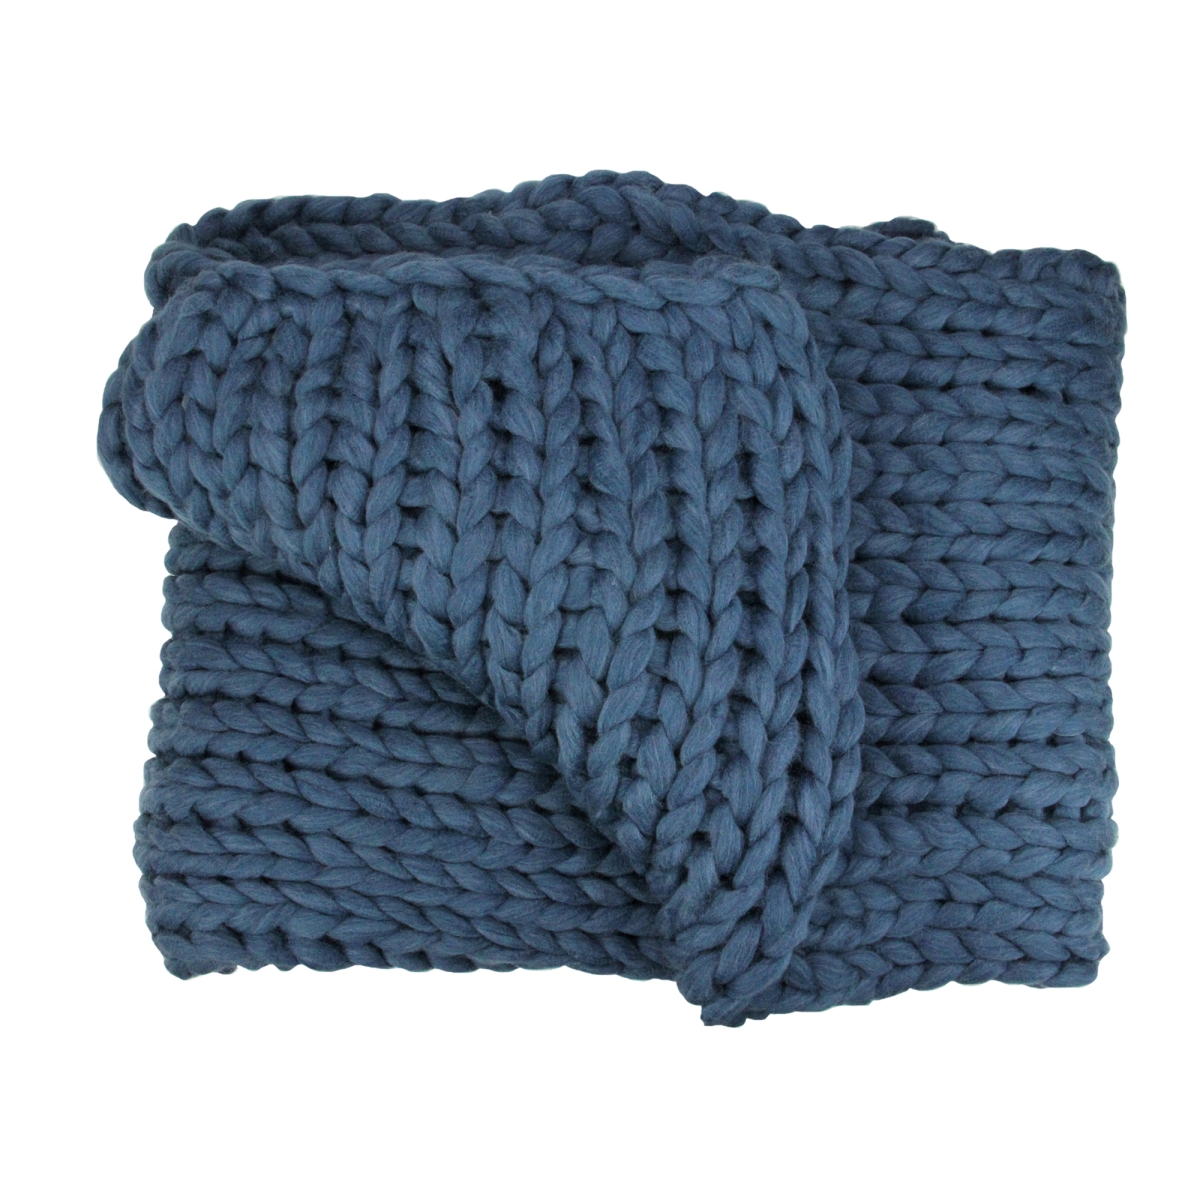 32913589 60 X 50 In. Navy Blue Cable Knit Plush Throw Blanket